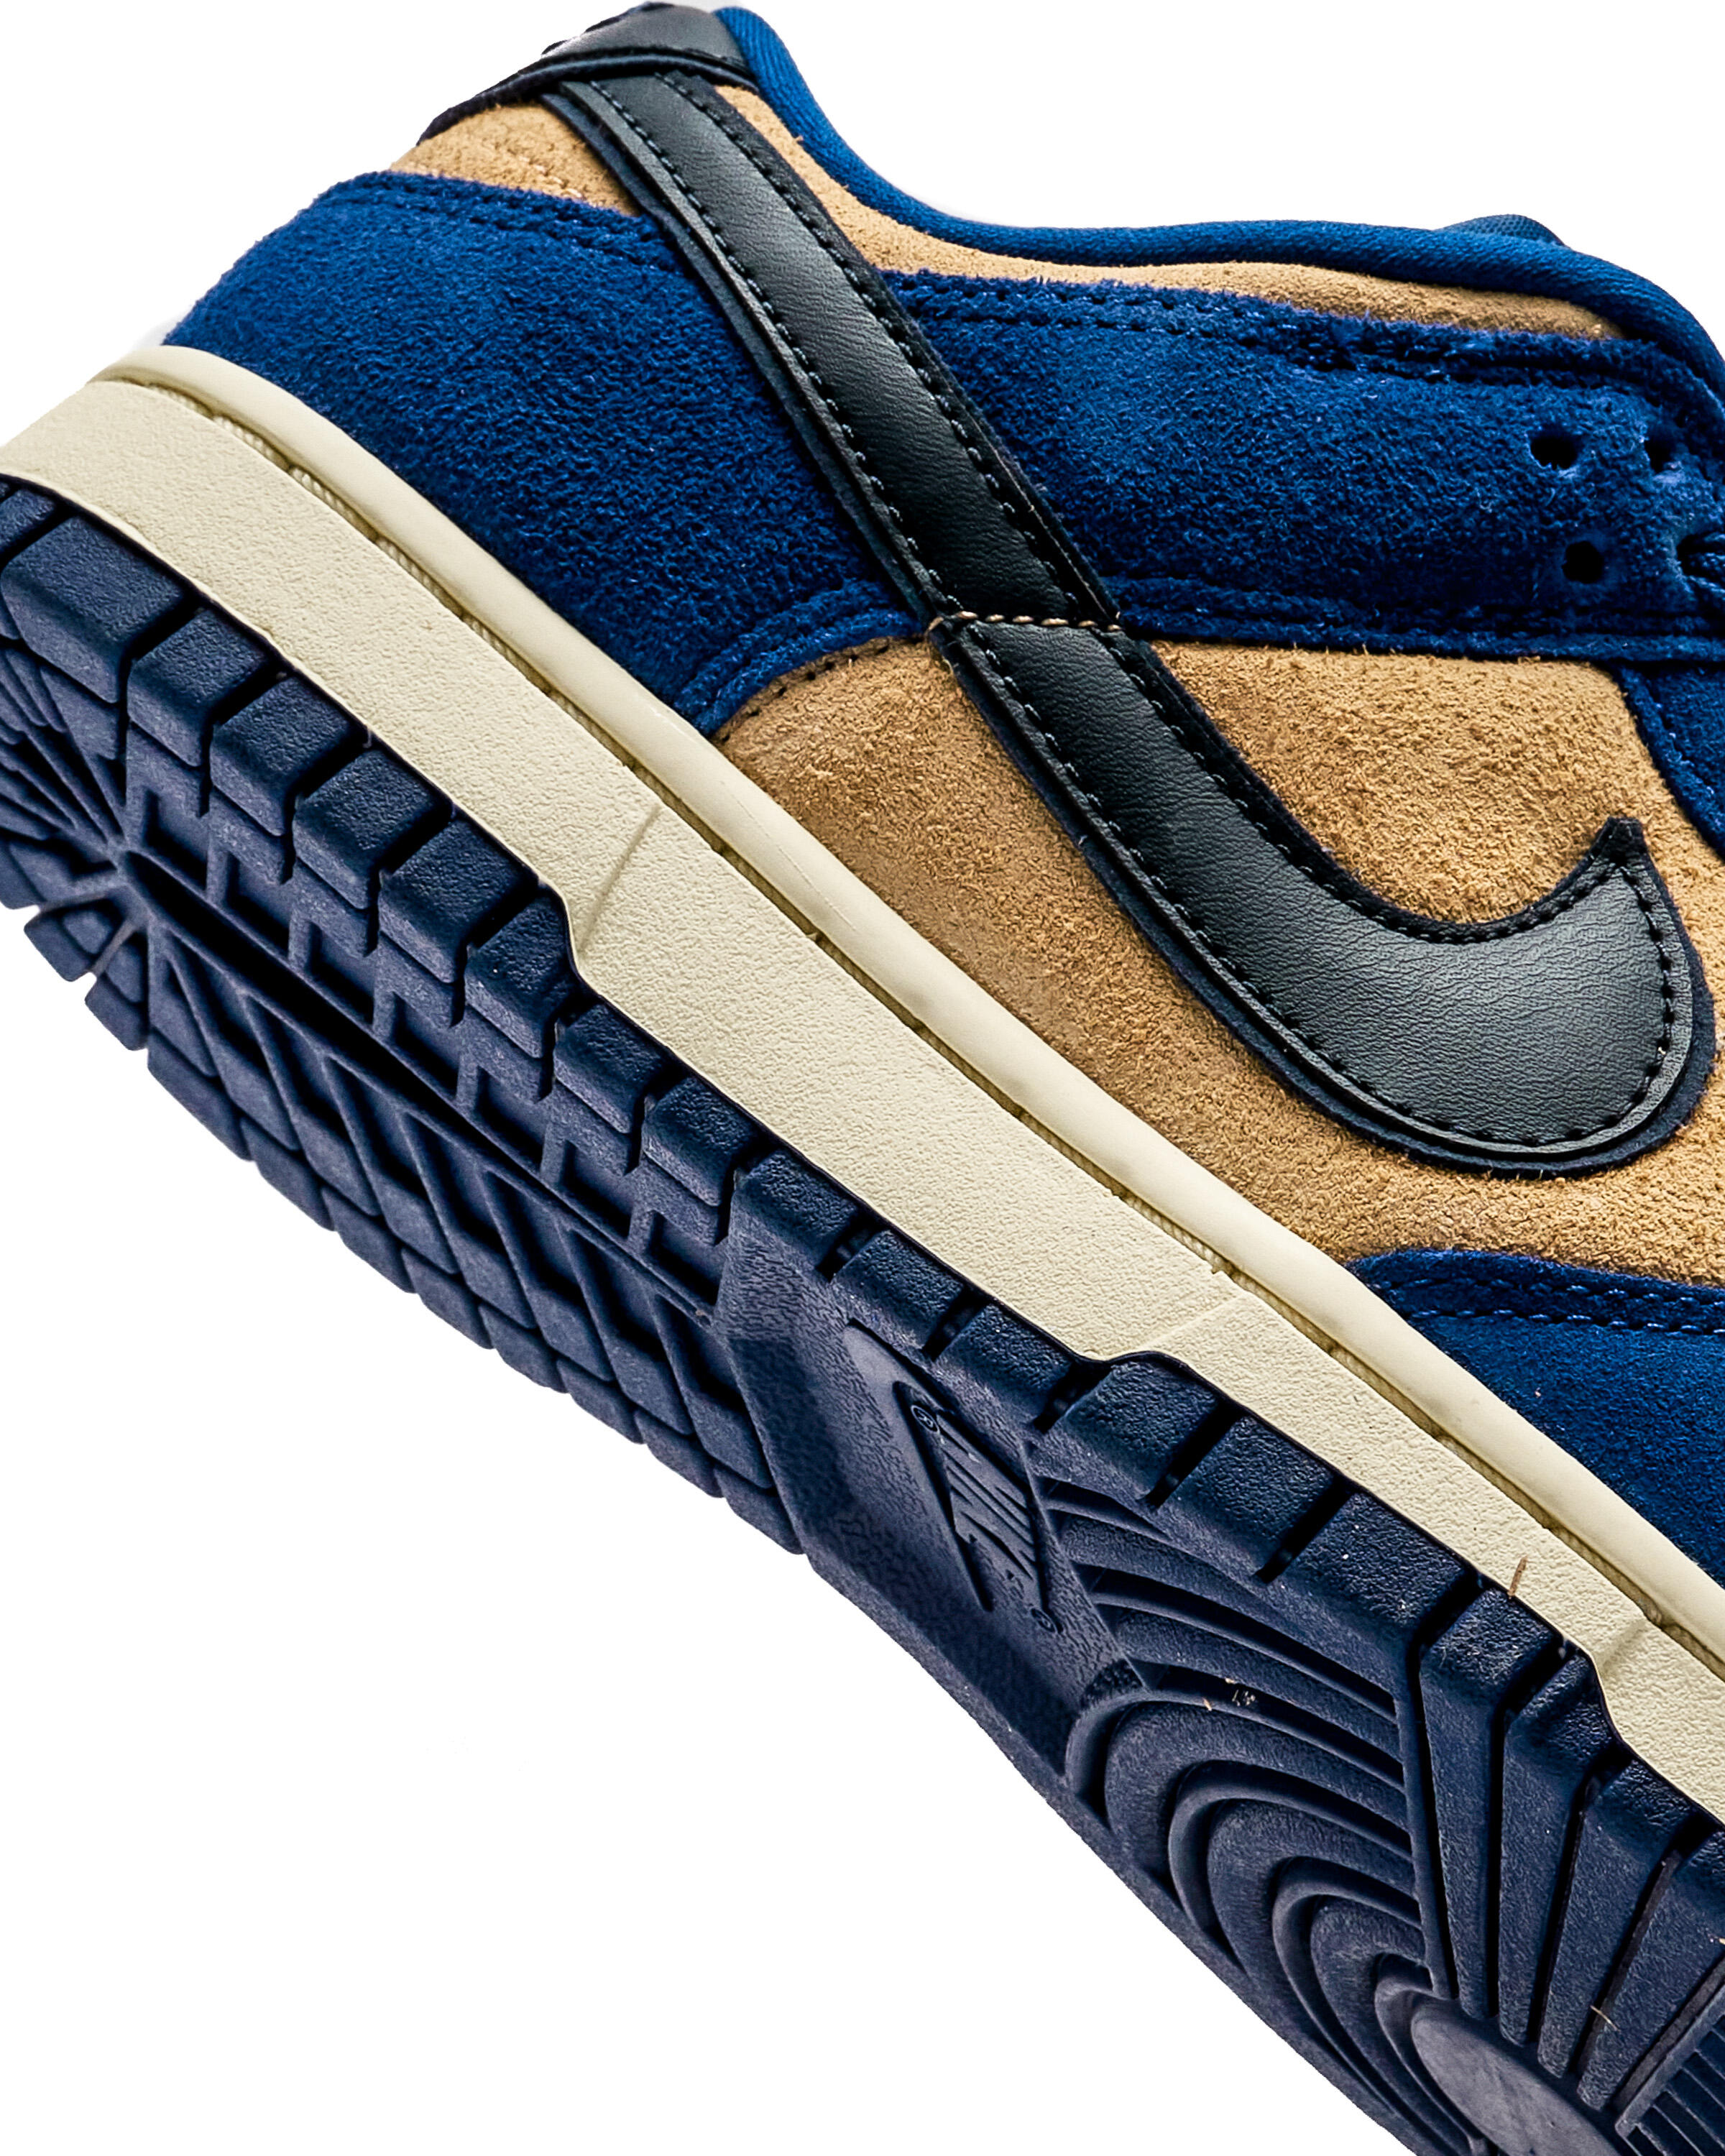 Nike WMNS DUNK LOW LX 'Blue Suede'